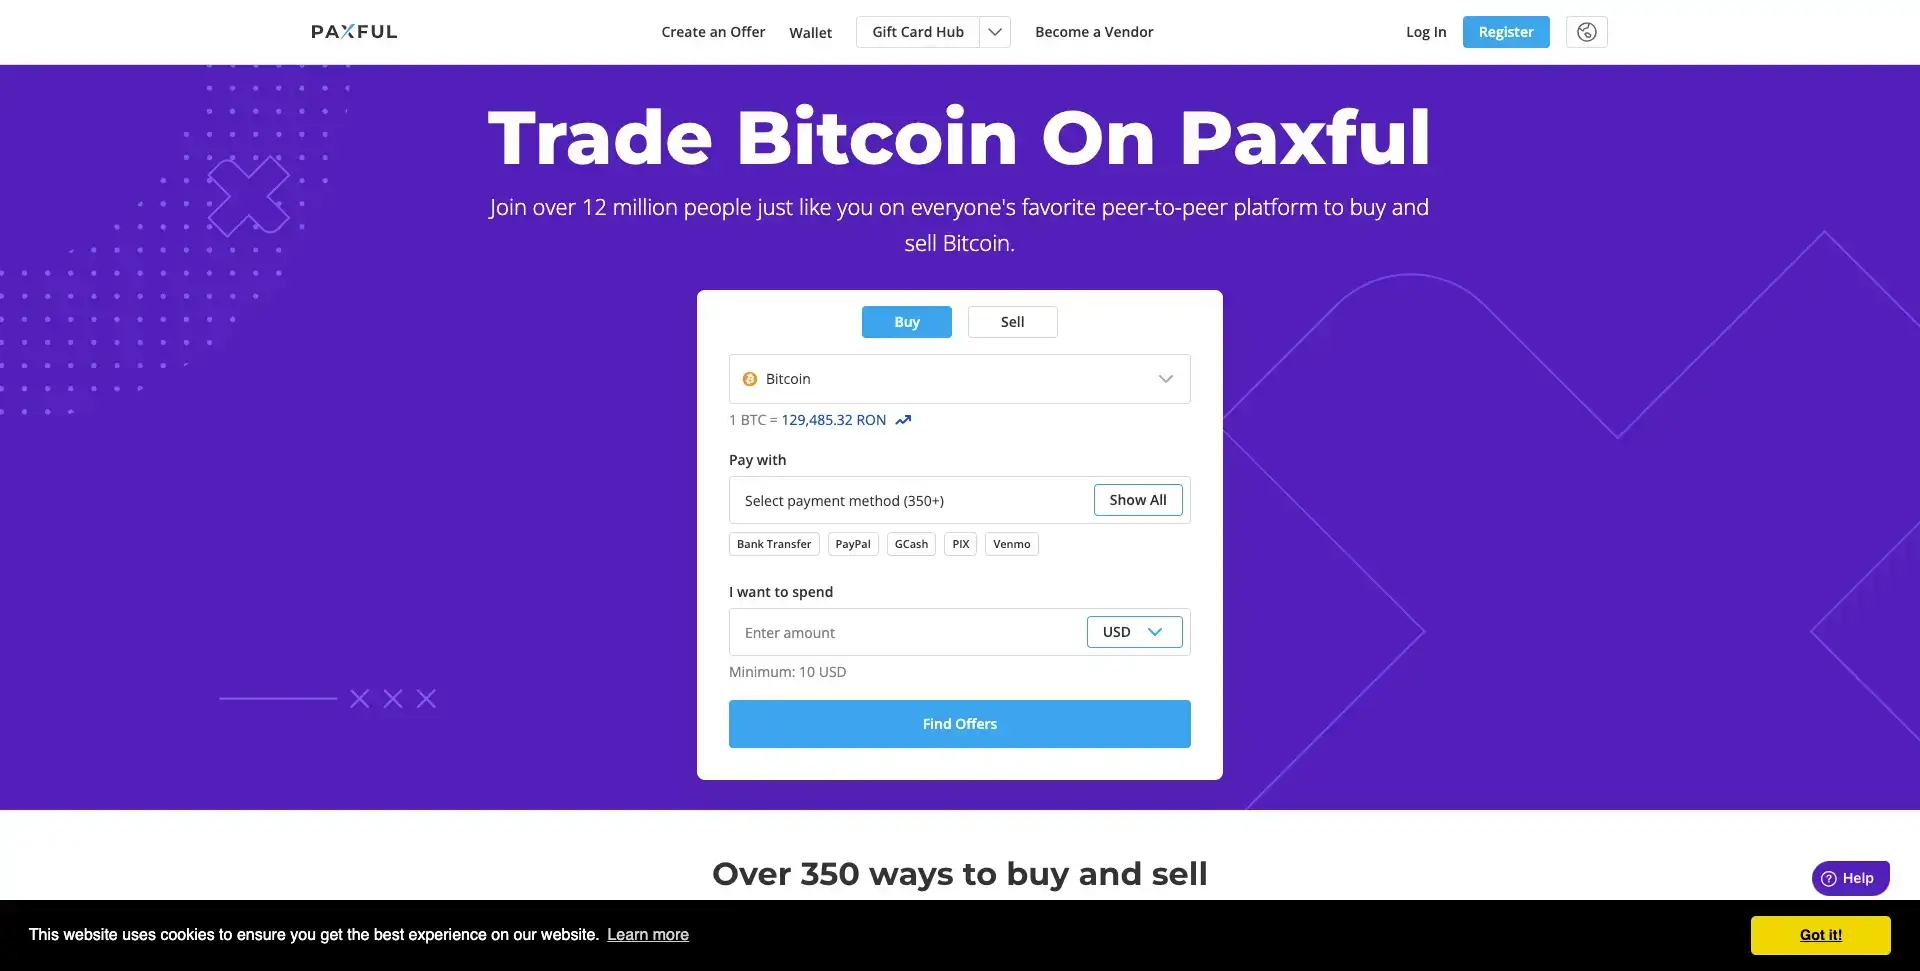 Buy Bitcoins with Apple Pay on Paxful